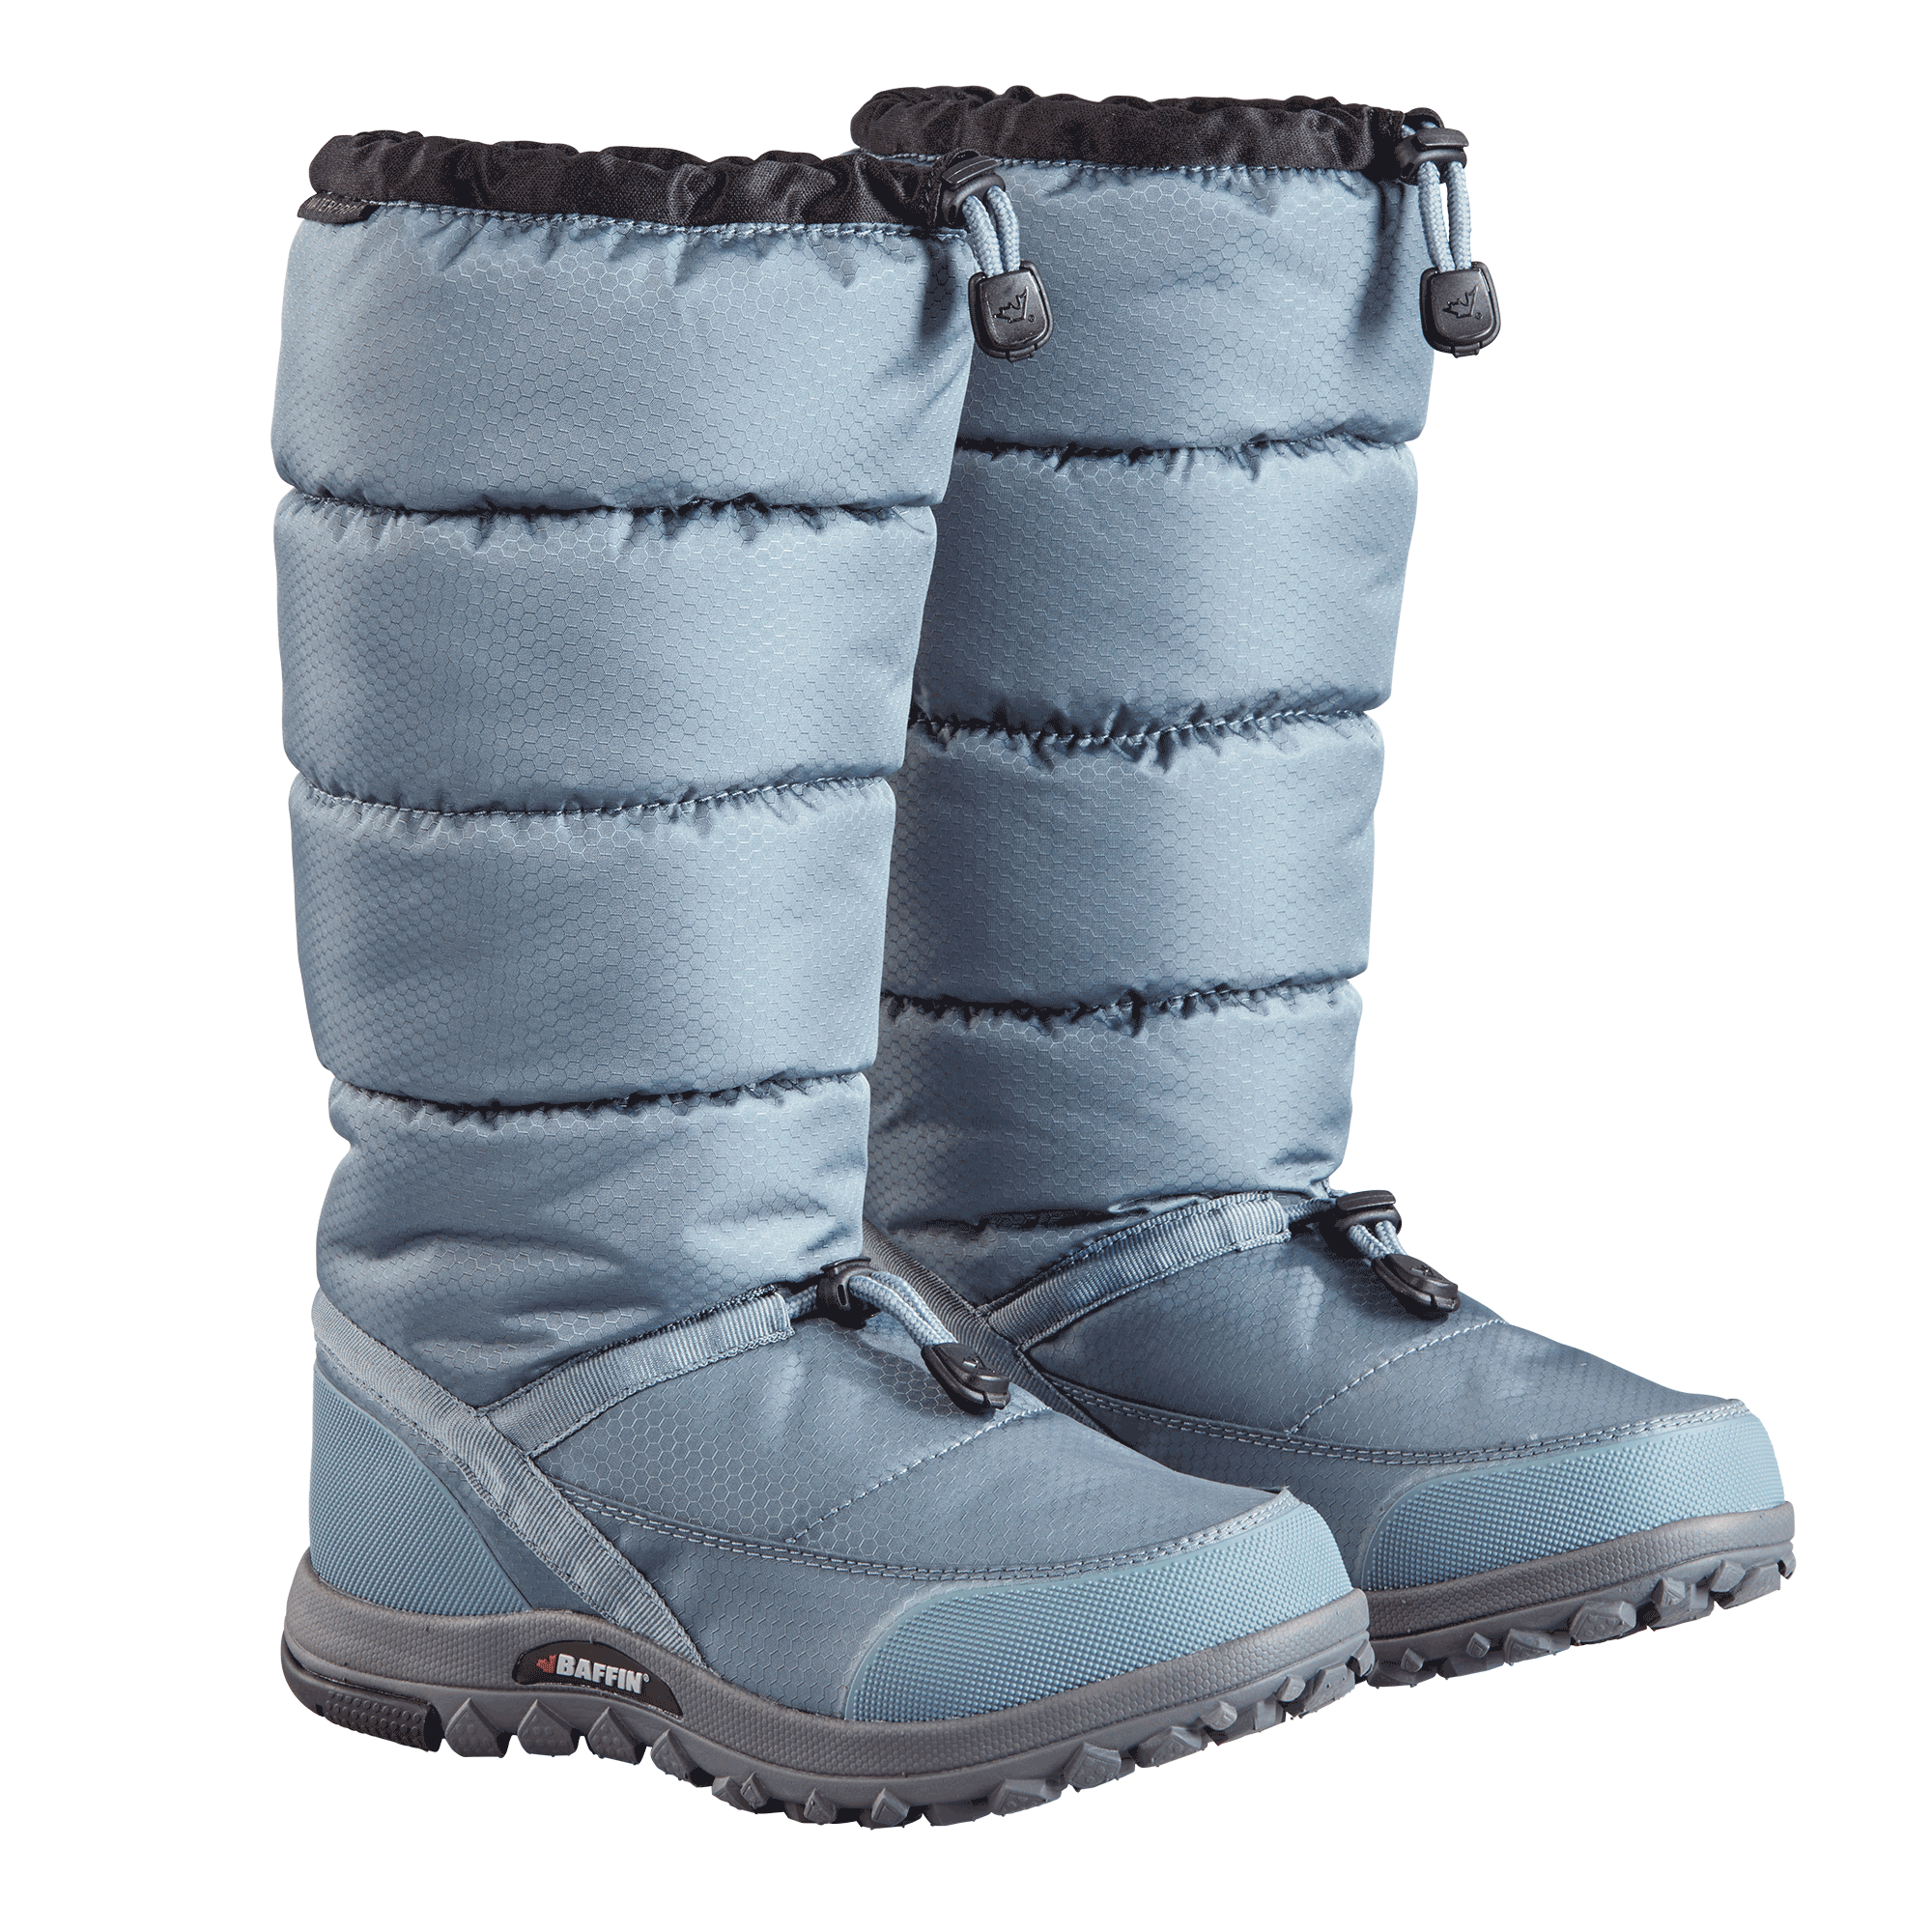 CLOUD | Women's Boot – Baffin - Born in the North '79